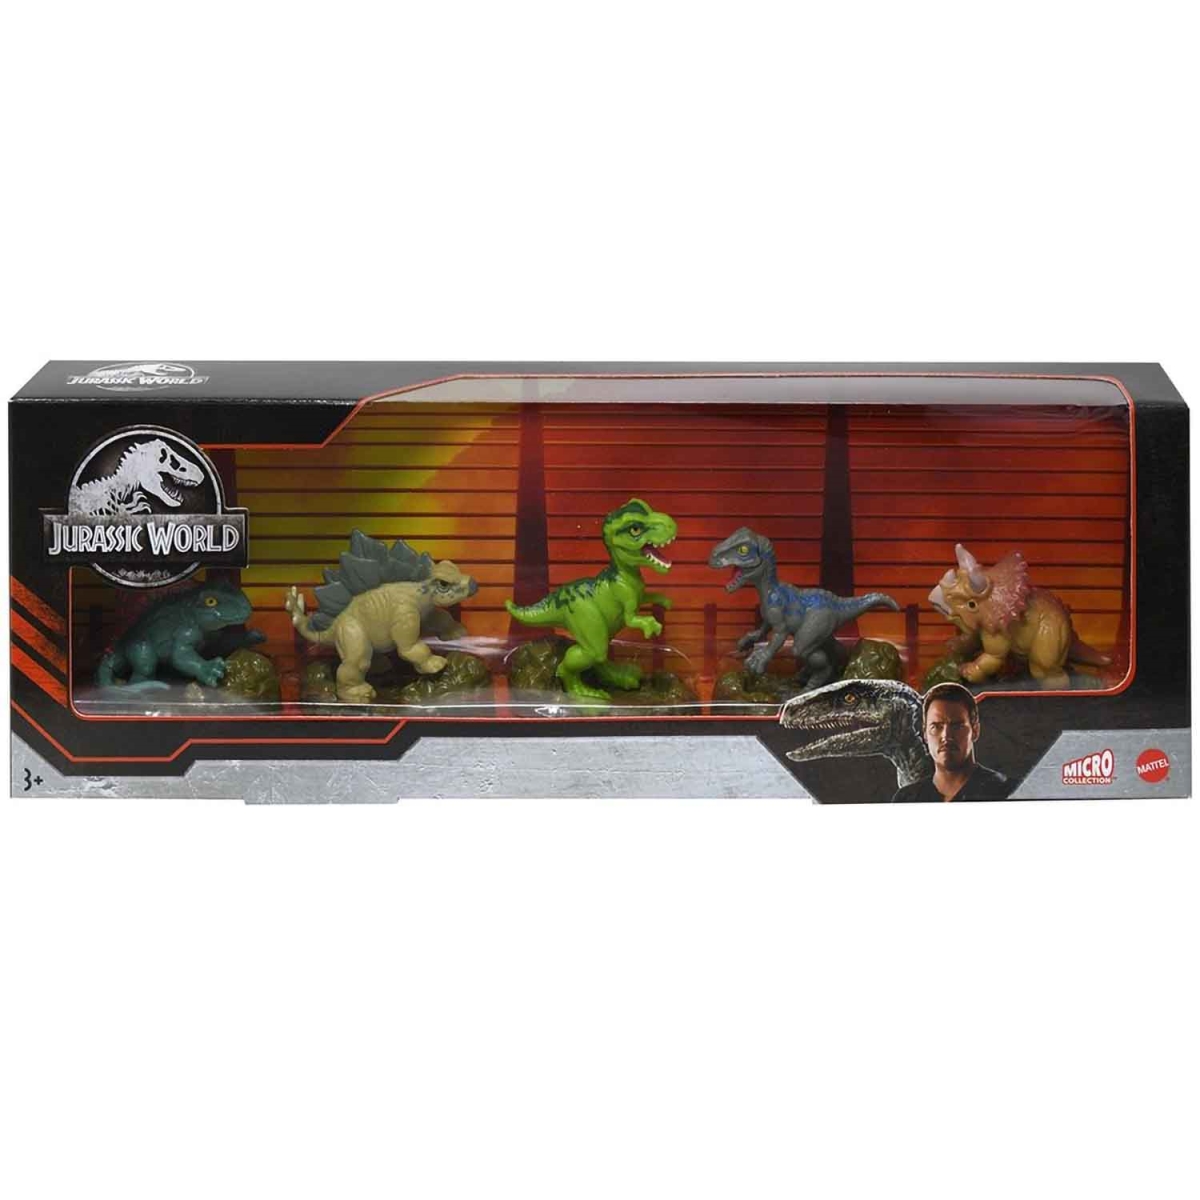 Picture of KimmyShop 30388160 Jurassic World Mini Figure Collection - Pack of 5